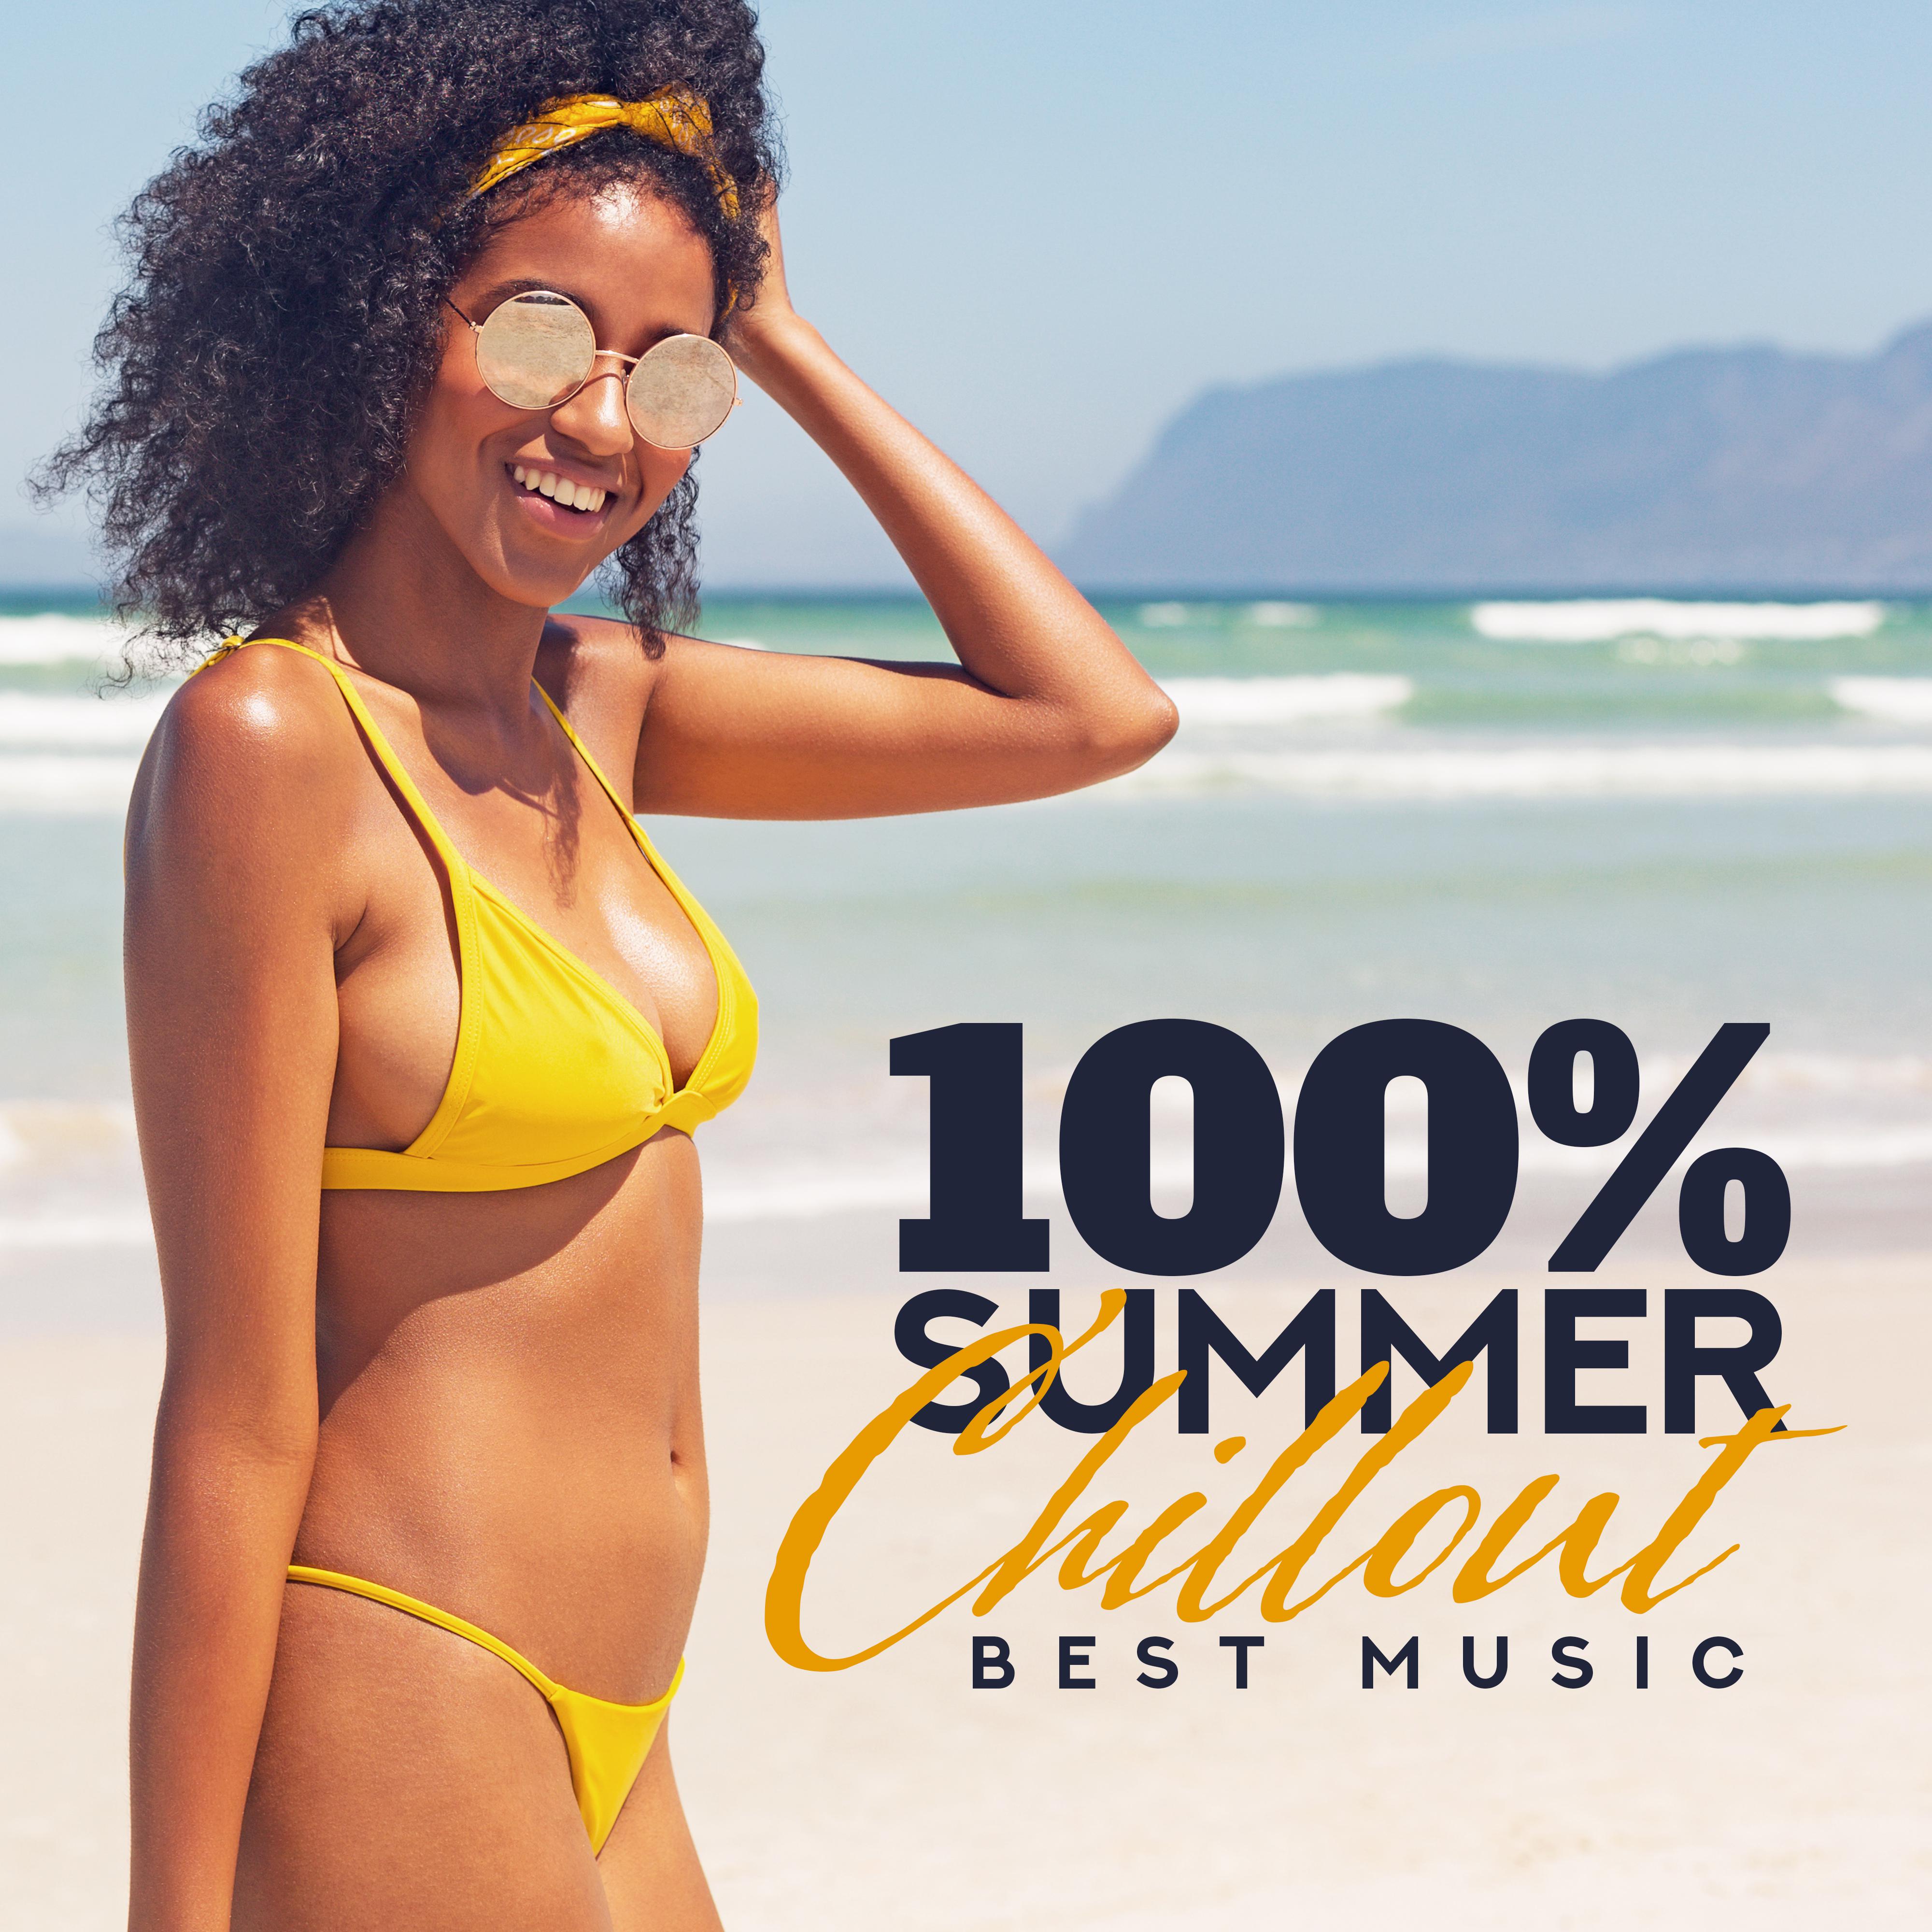 100% Summer Chillout Best Music: 2019 Electronic Beats & Vibes, Perfect Vacation Compilation, Tropical Beach Relaxation Songs